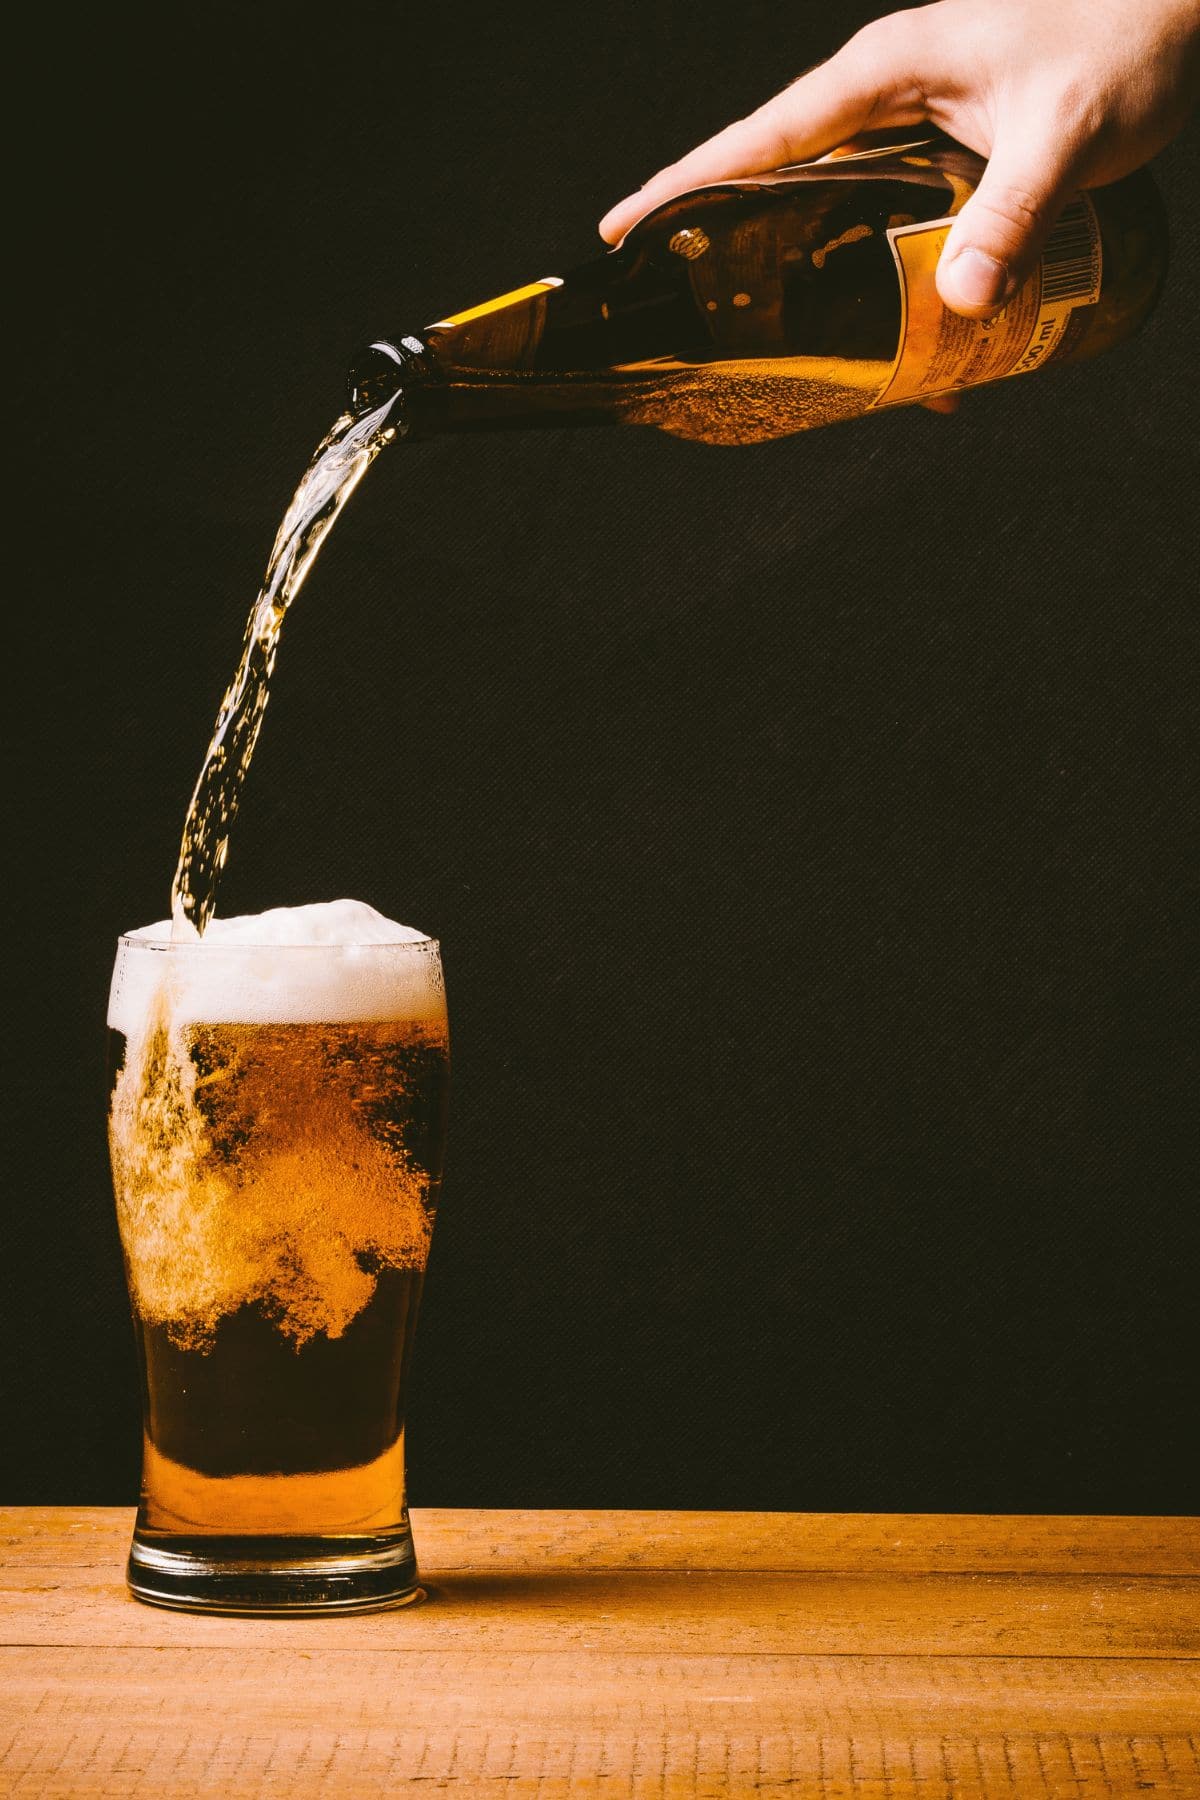 a person holding a bottle of beer, pouring it into a glass.